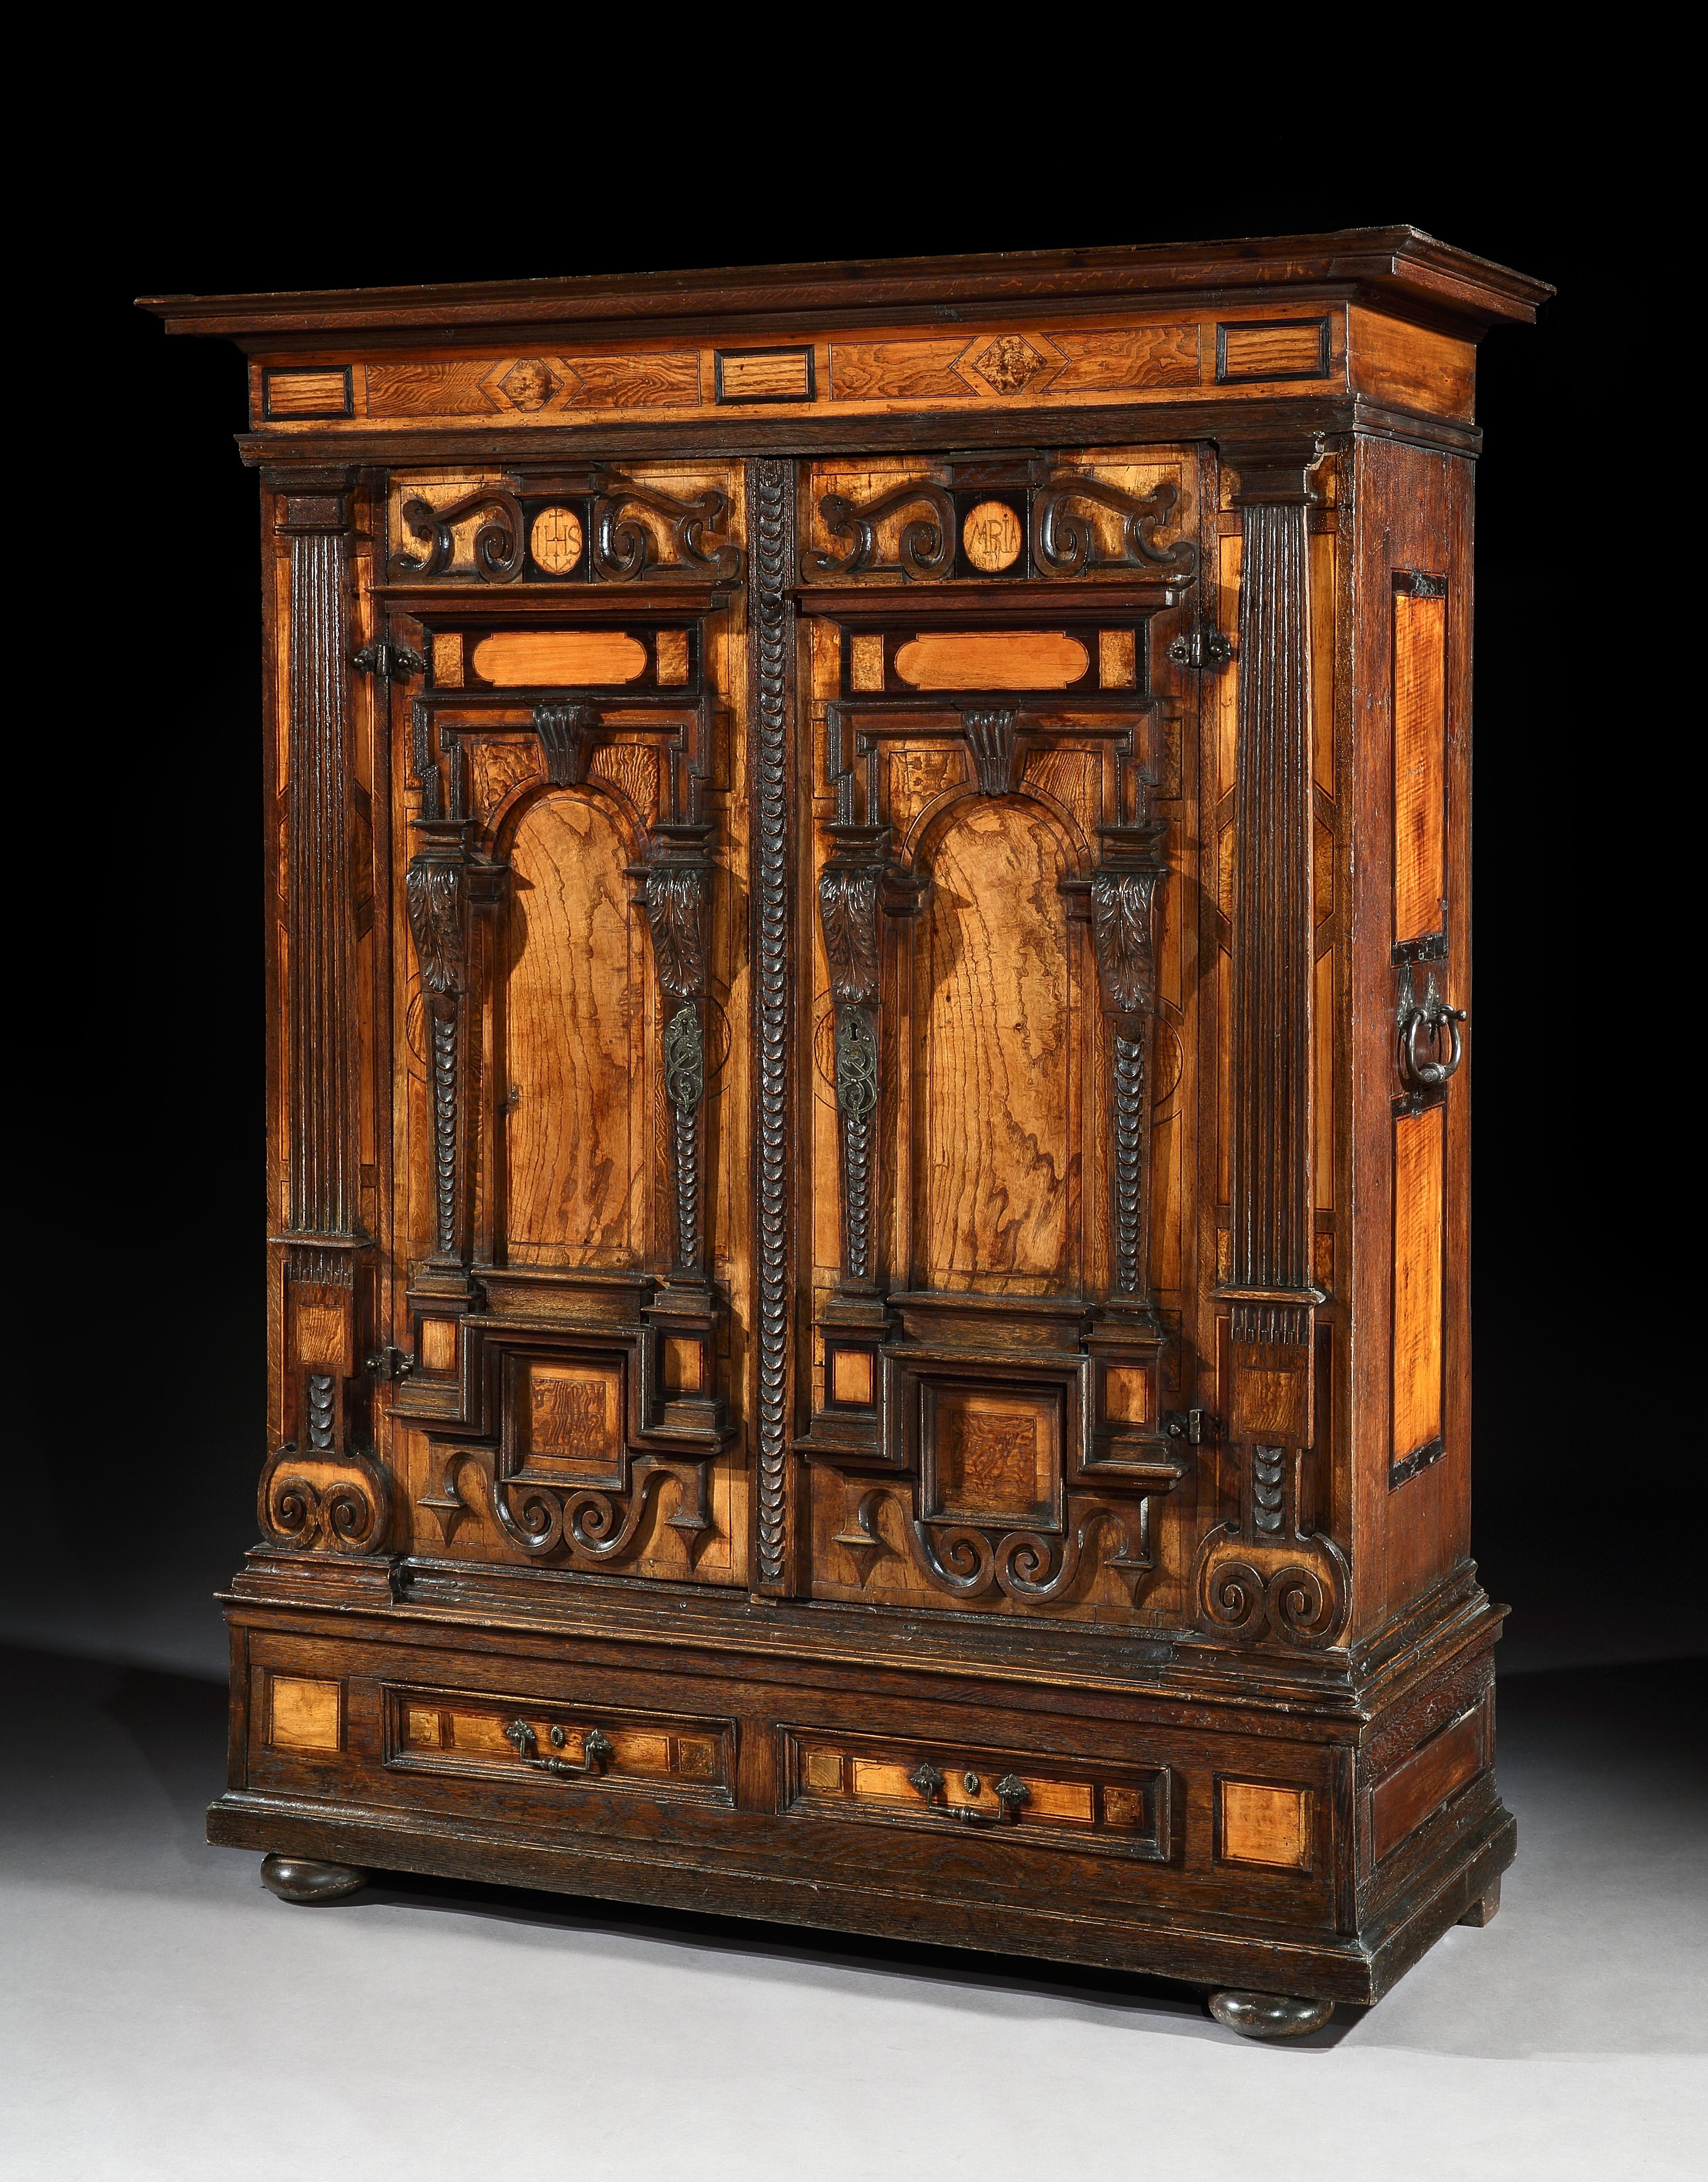 An Exceptional, Museum Quality, Mannerist, German, Façade Cabinet or Fassadenschrank in three sections

The ultimate status symbol and feat of mannerist cabinetmaking, this Fassadenschrank incorporates layers of inlay of different woods prized for